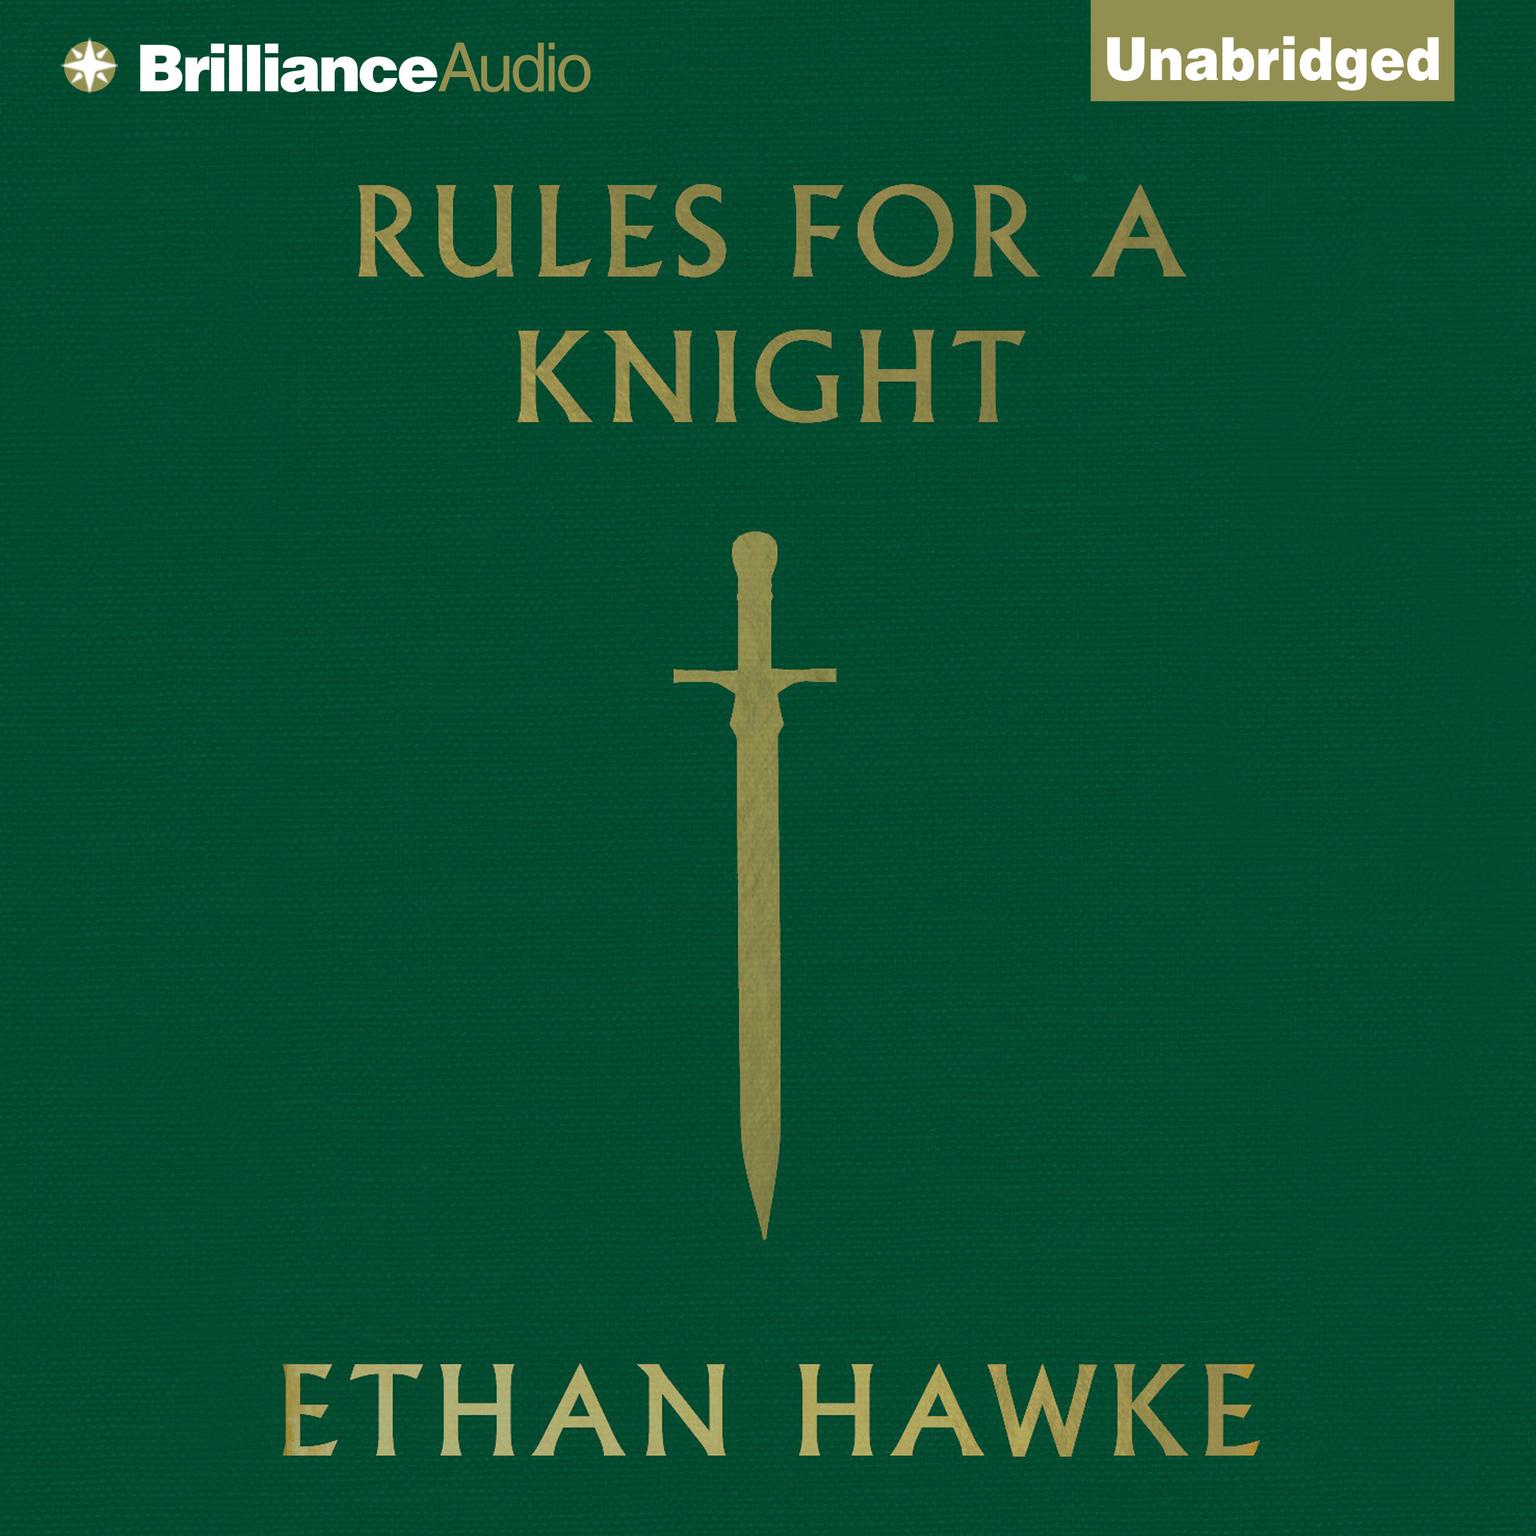 Rules for a Knight Audiobook, by Ethan Hawke